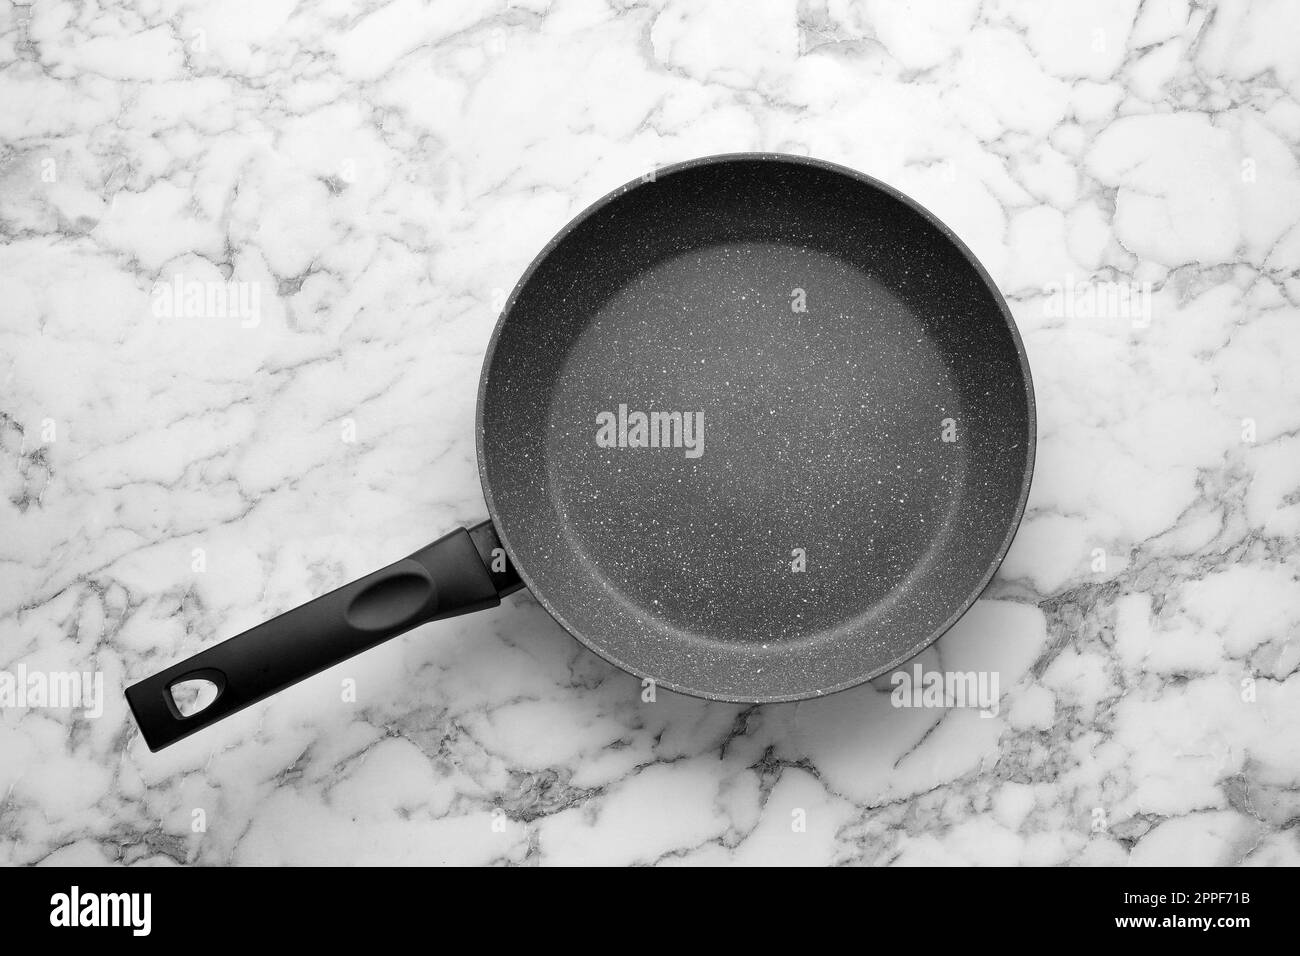 New non-stick frying pan on white marble table, top view Stock Photo